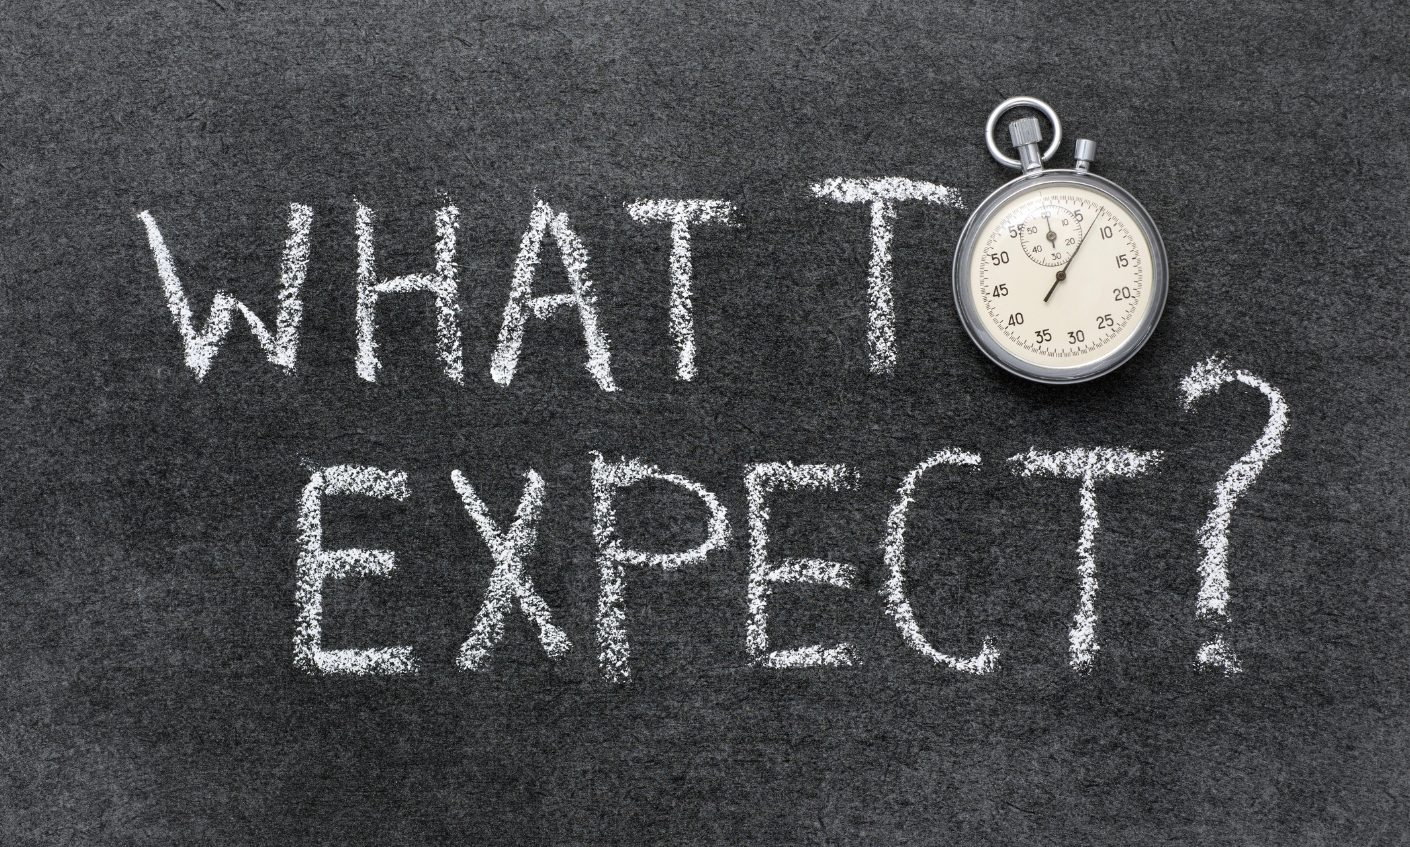 What to expect when you’re expecting - What happens when your relationship breaks down before the birth of your child?